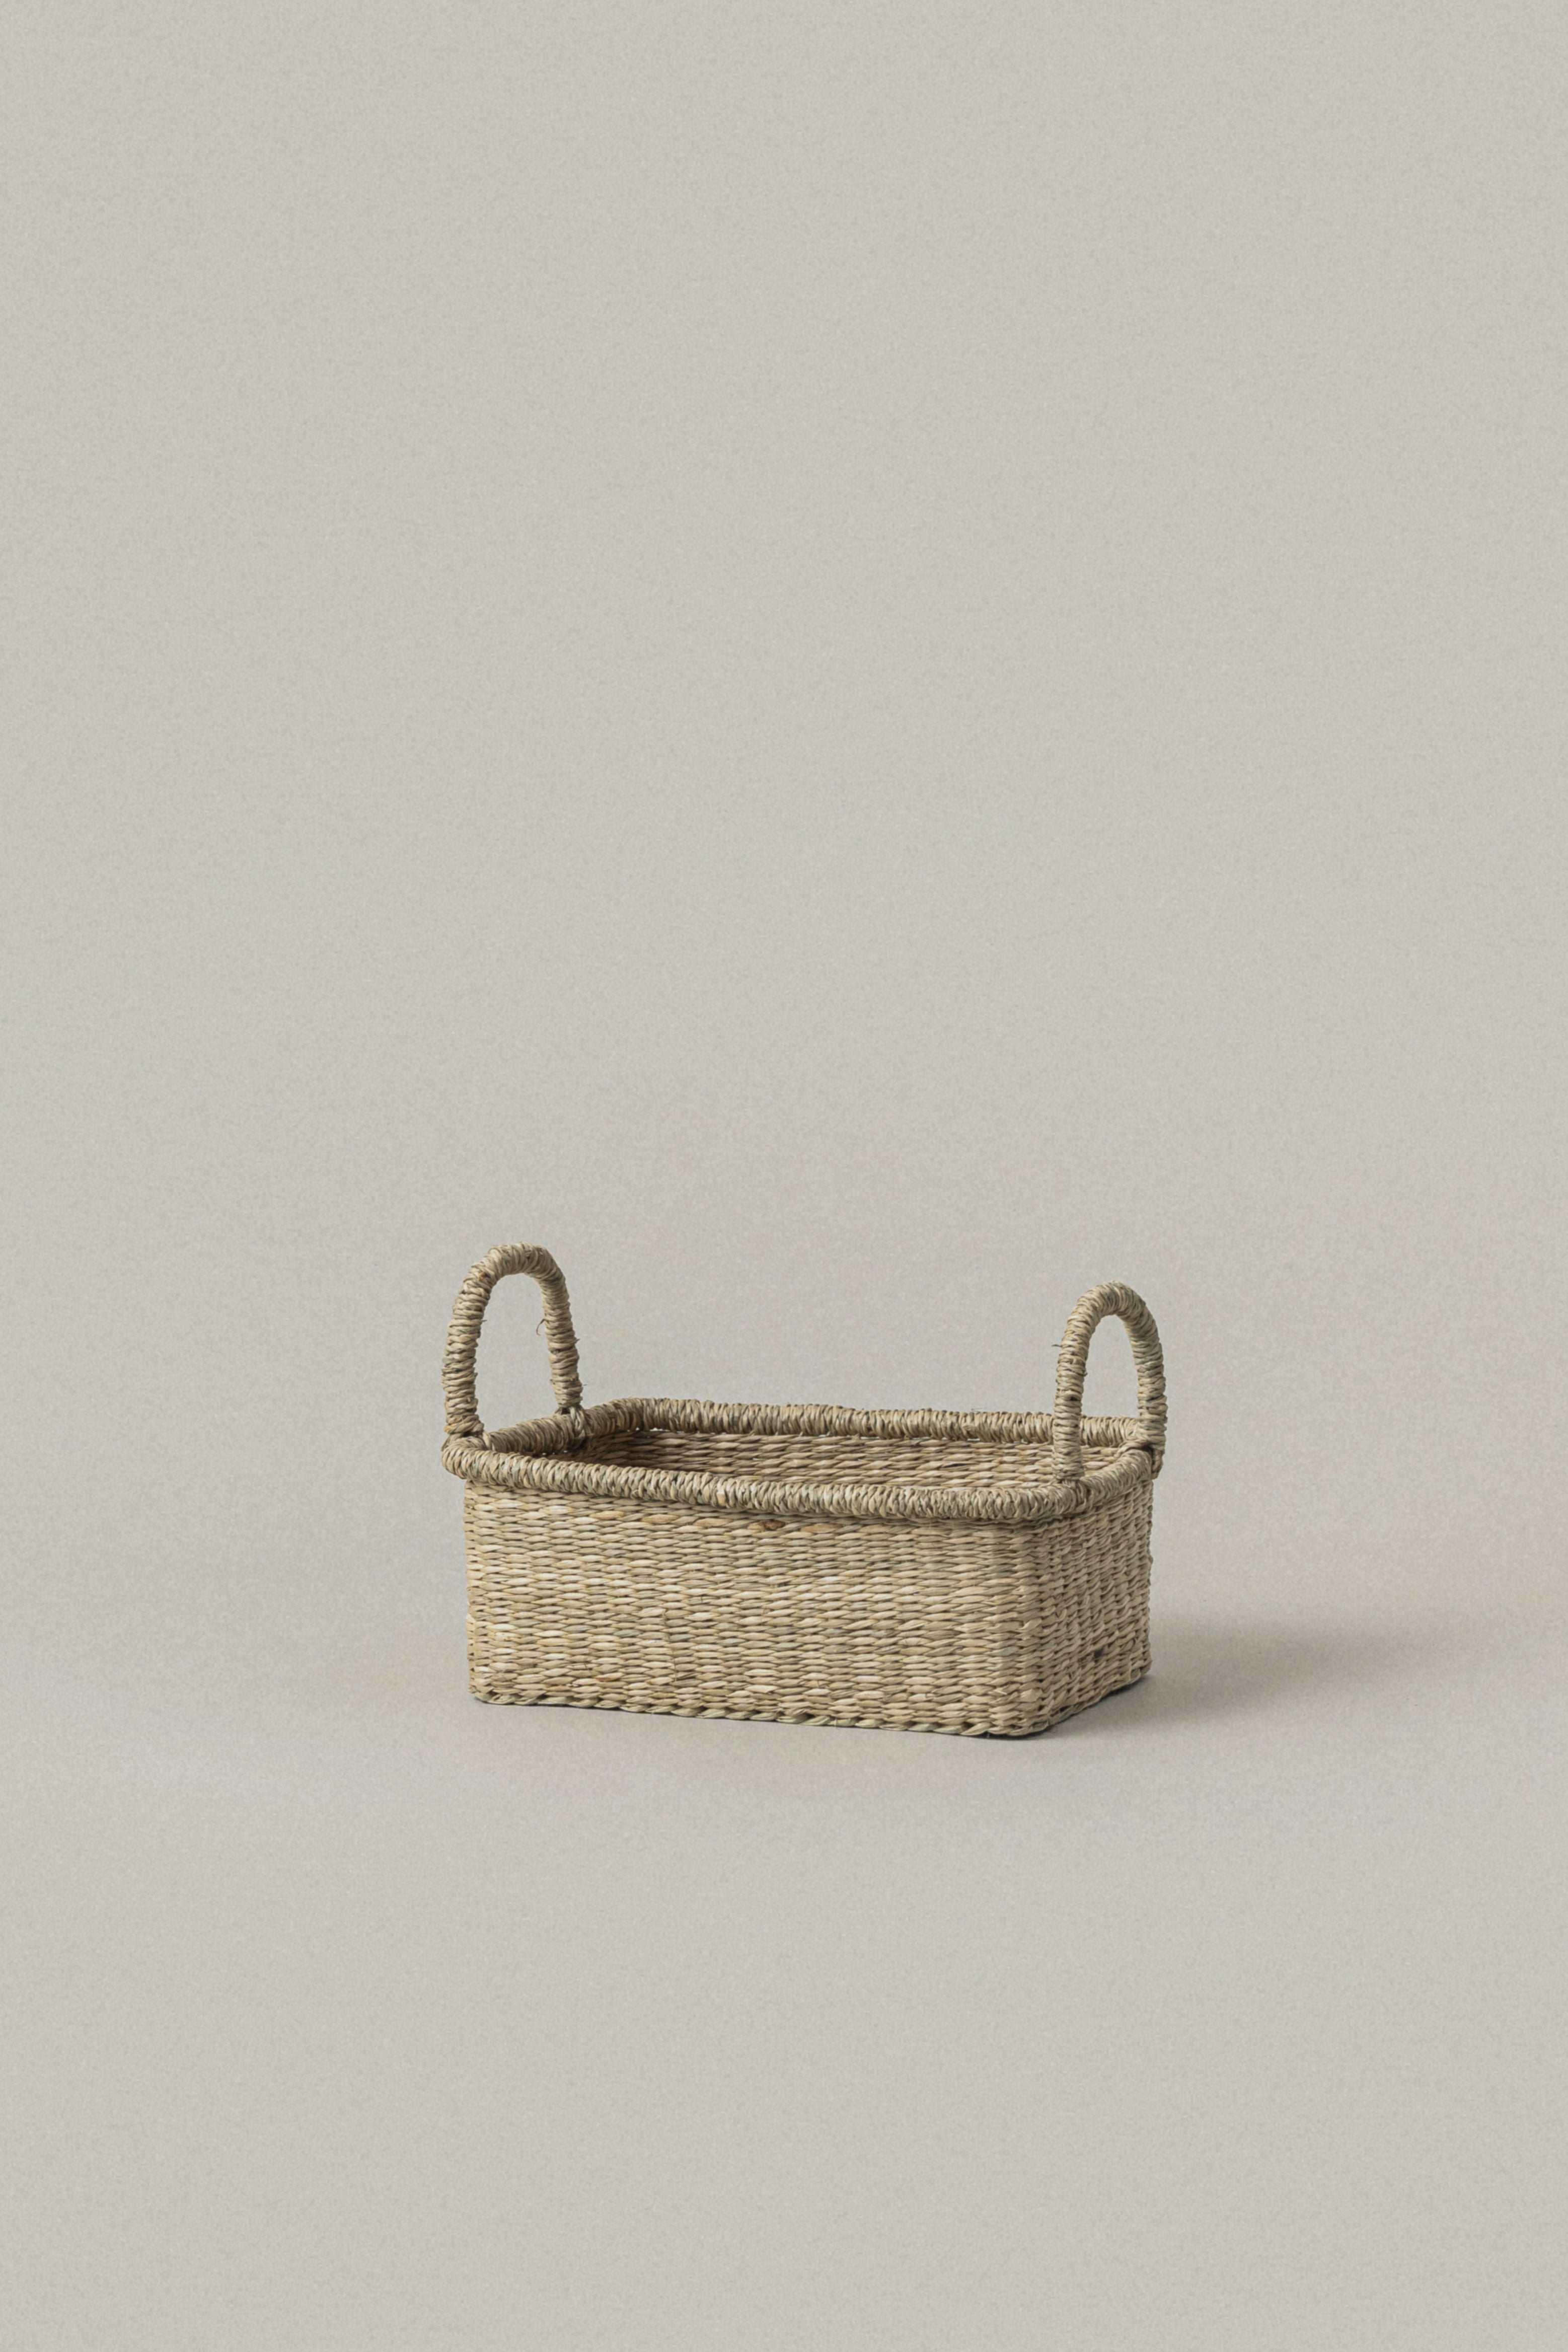 Small Lima Rectangular Seagrass Basket with Handles - Small Lima Rectangular Seagrass Basket with Handles